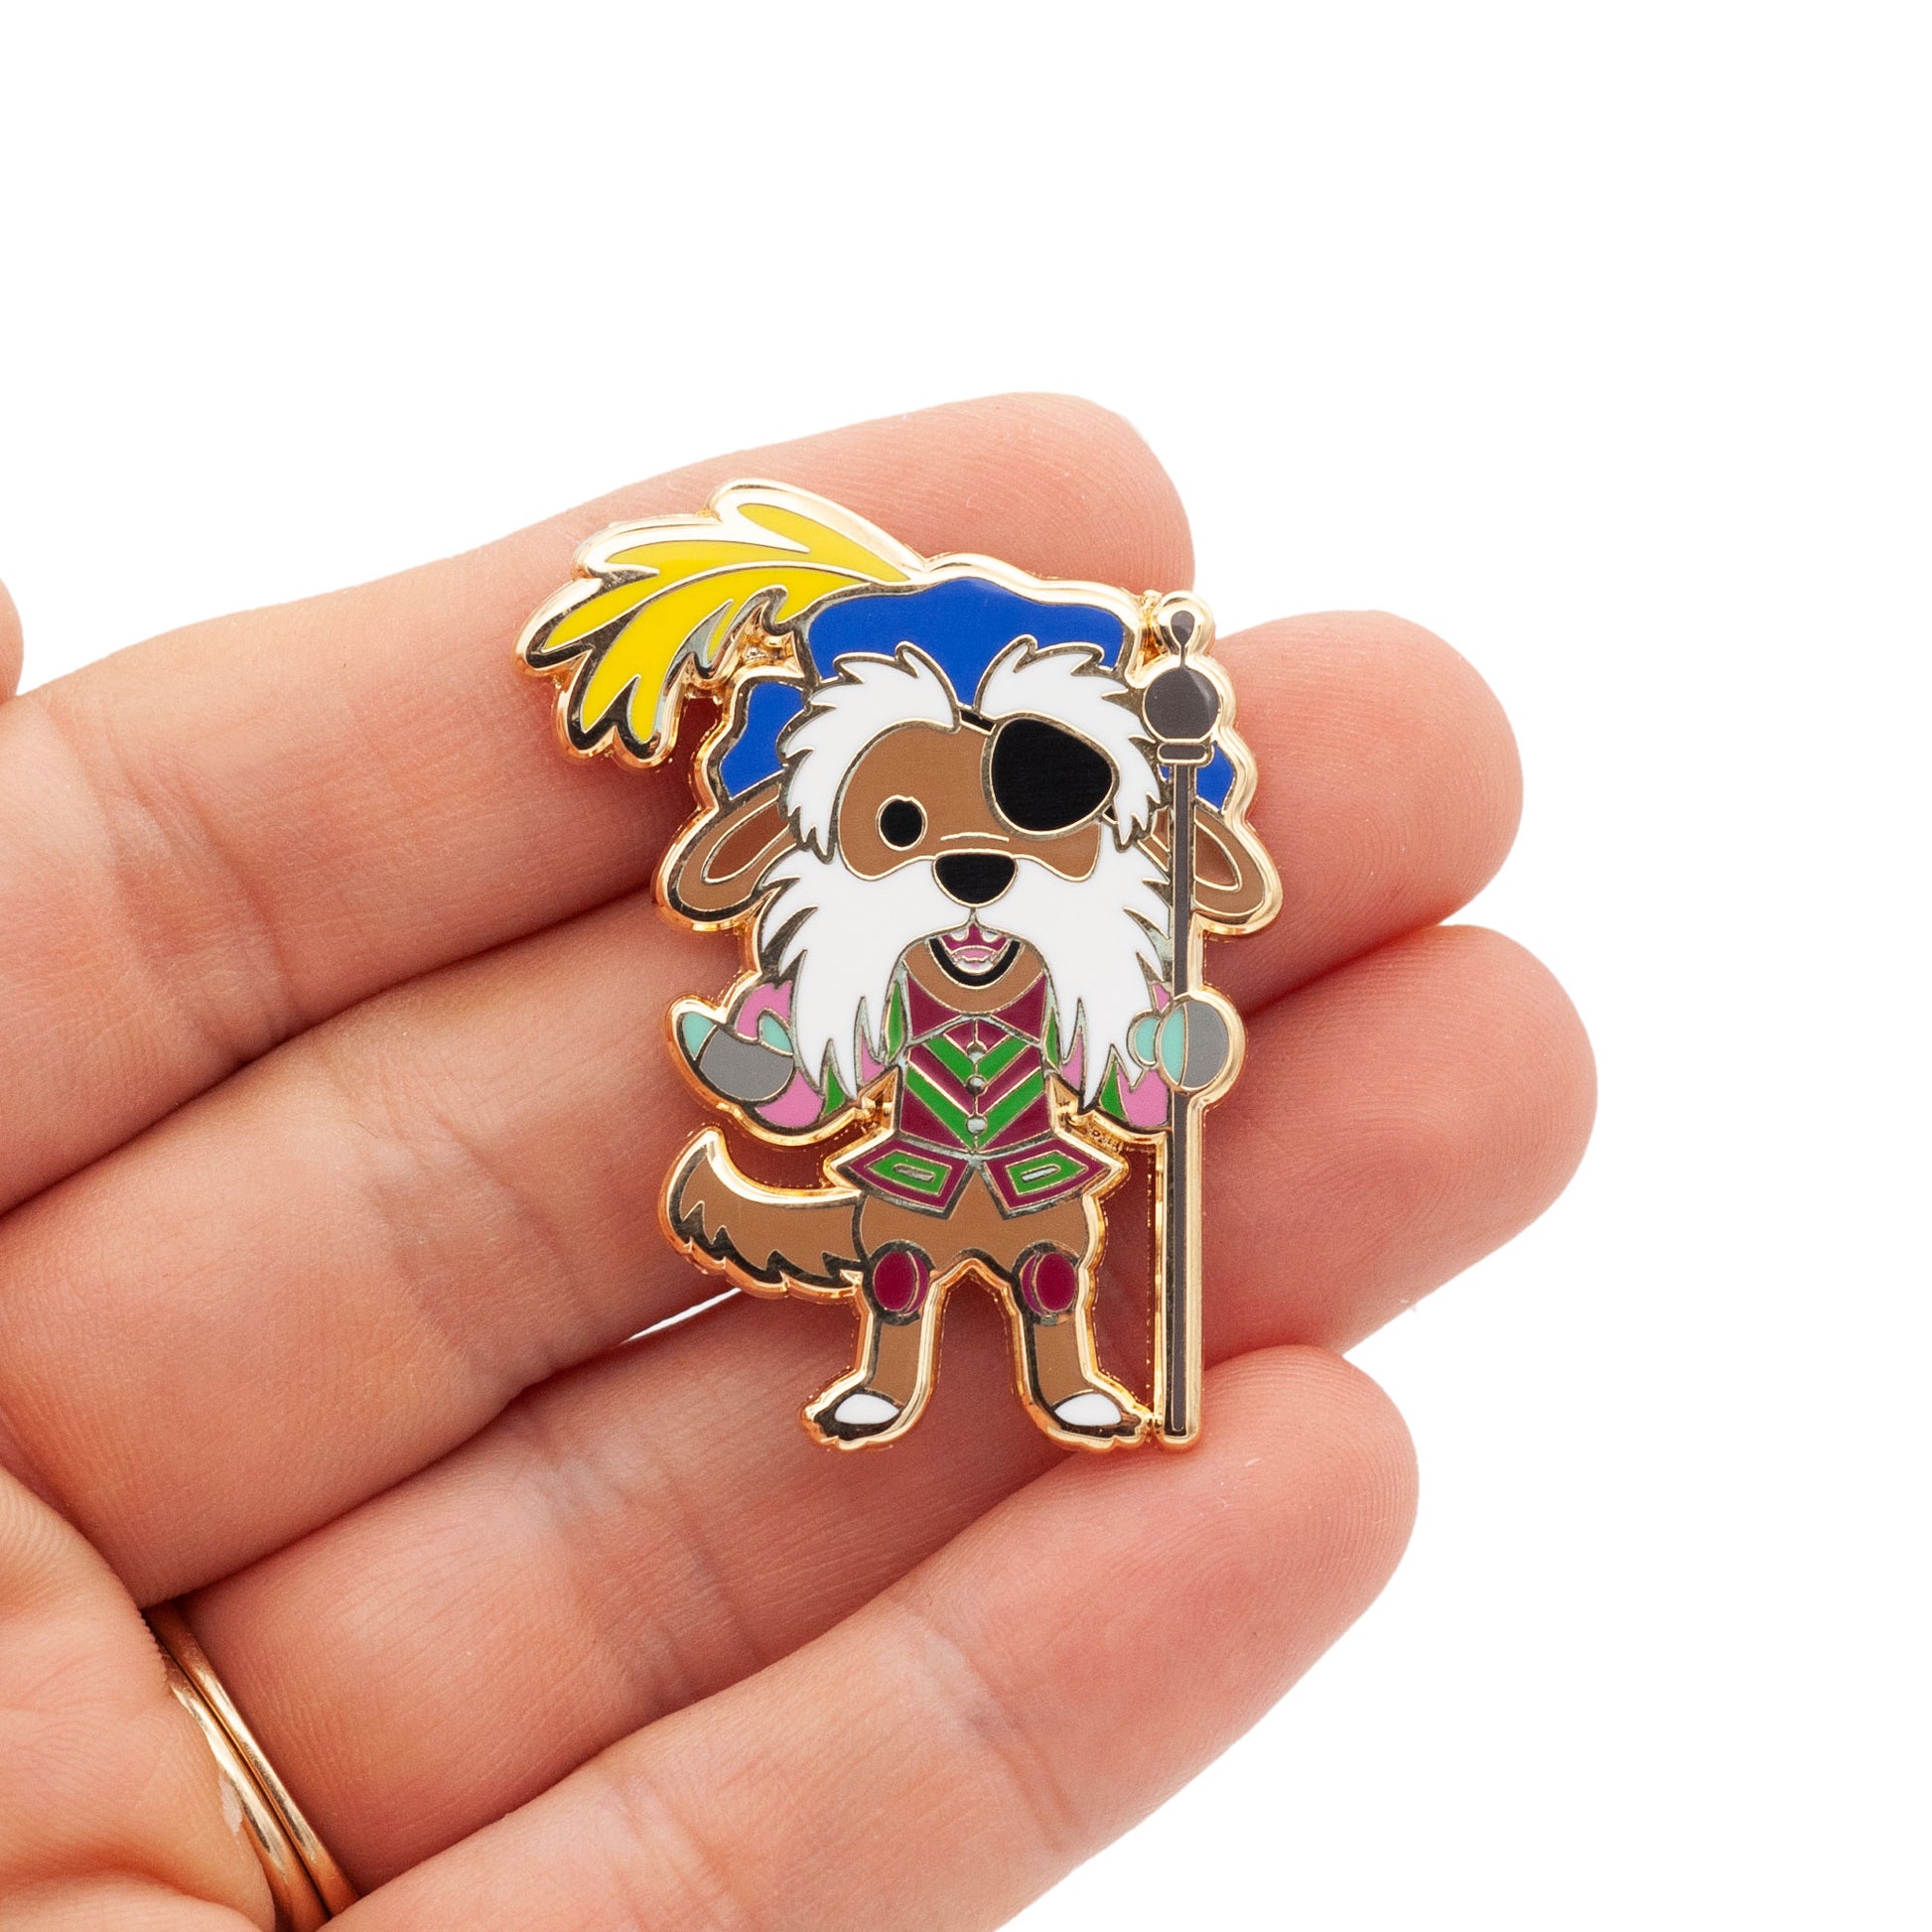 Sir Didymus lapel pin in gold plated hard enamel. Colors include yellow, blue, brown, red, green, black, and white.